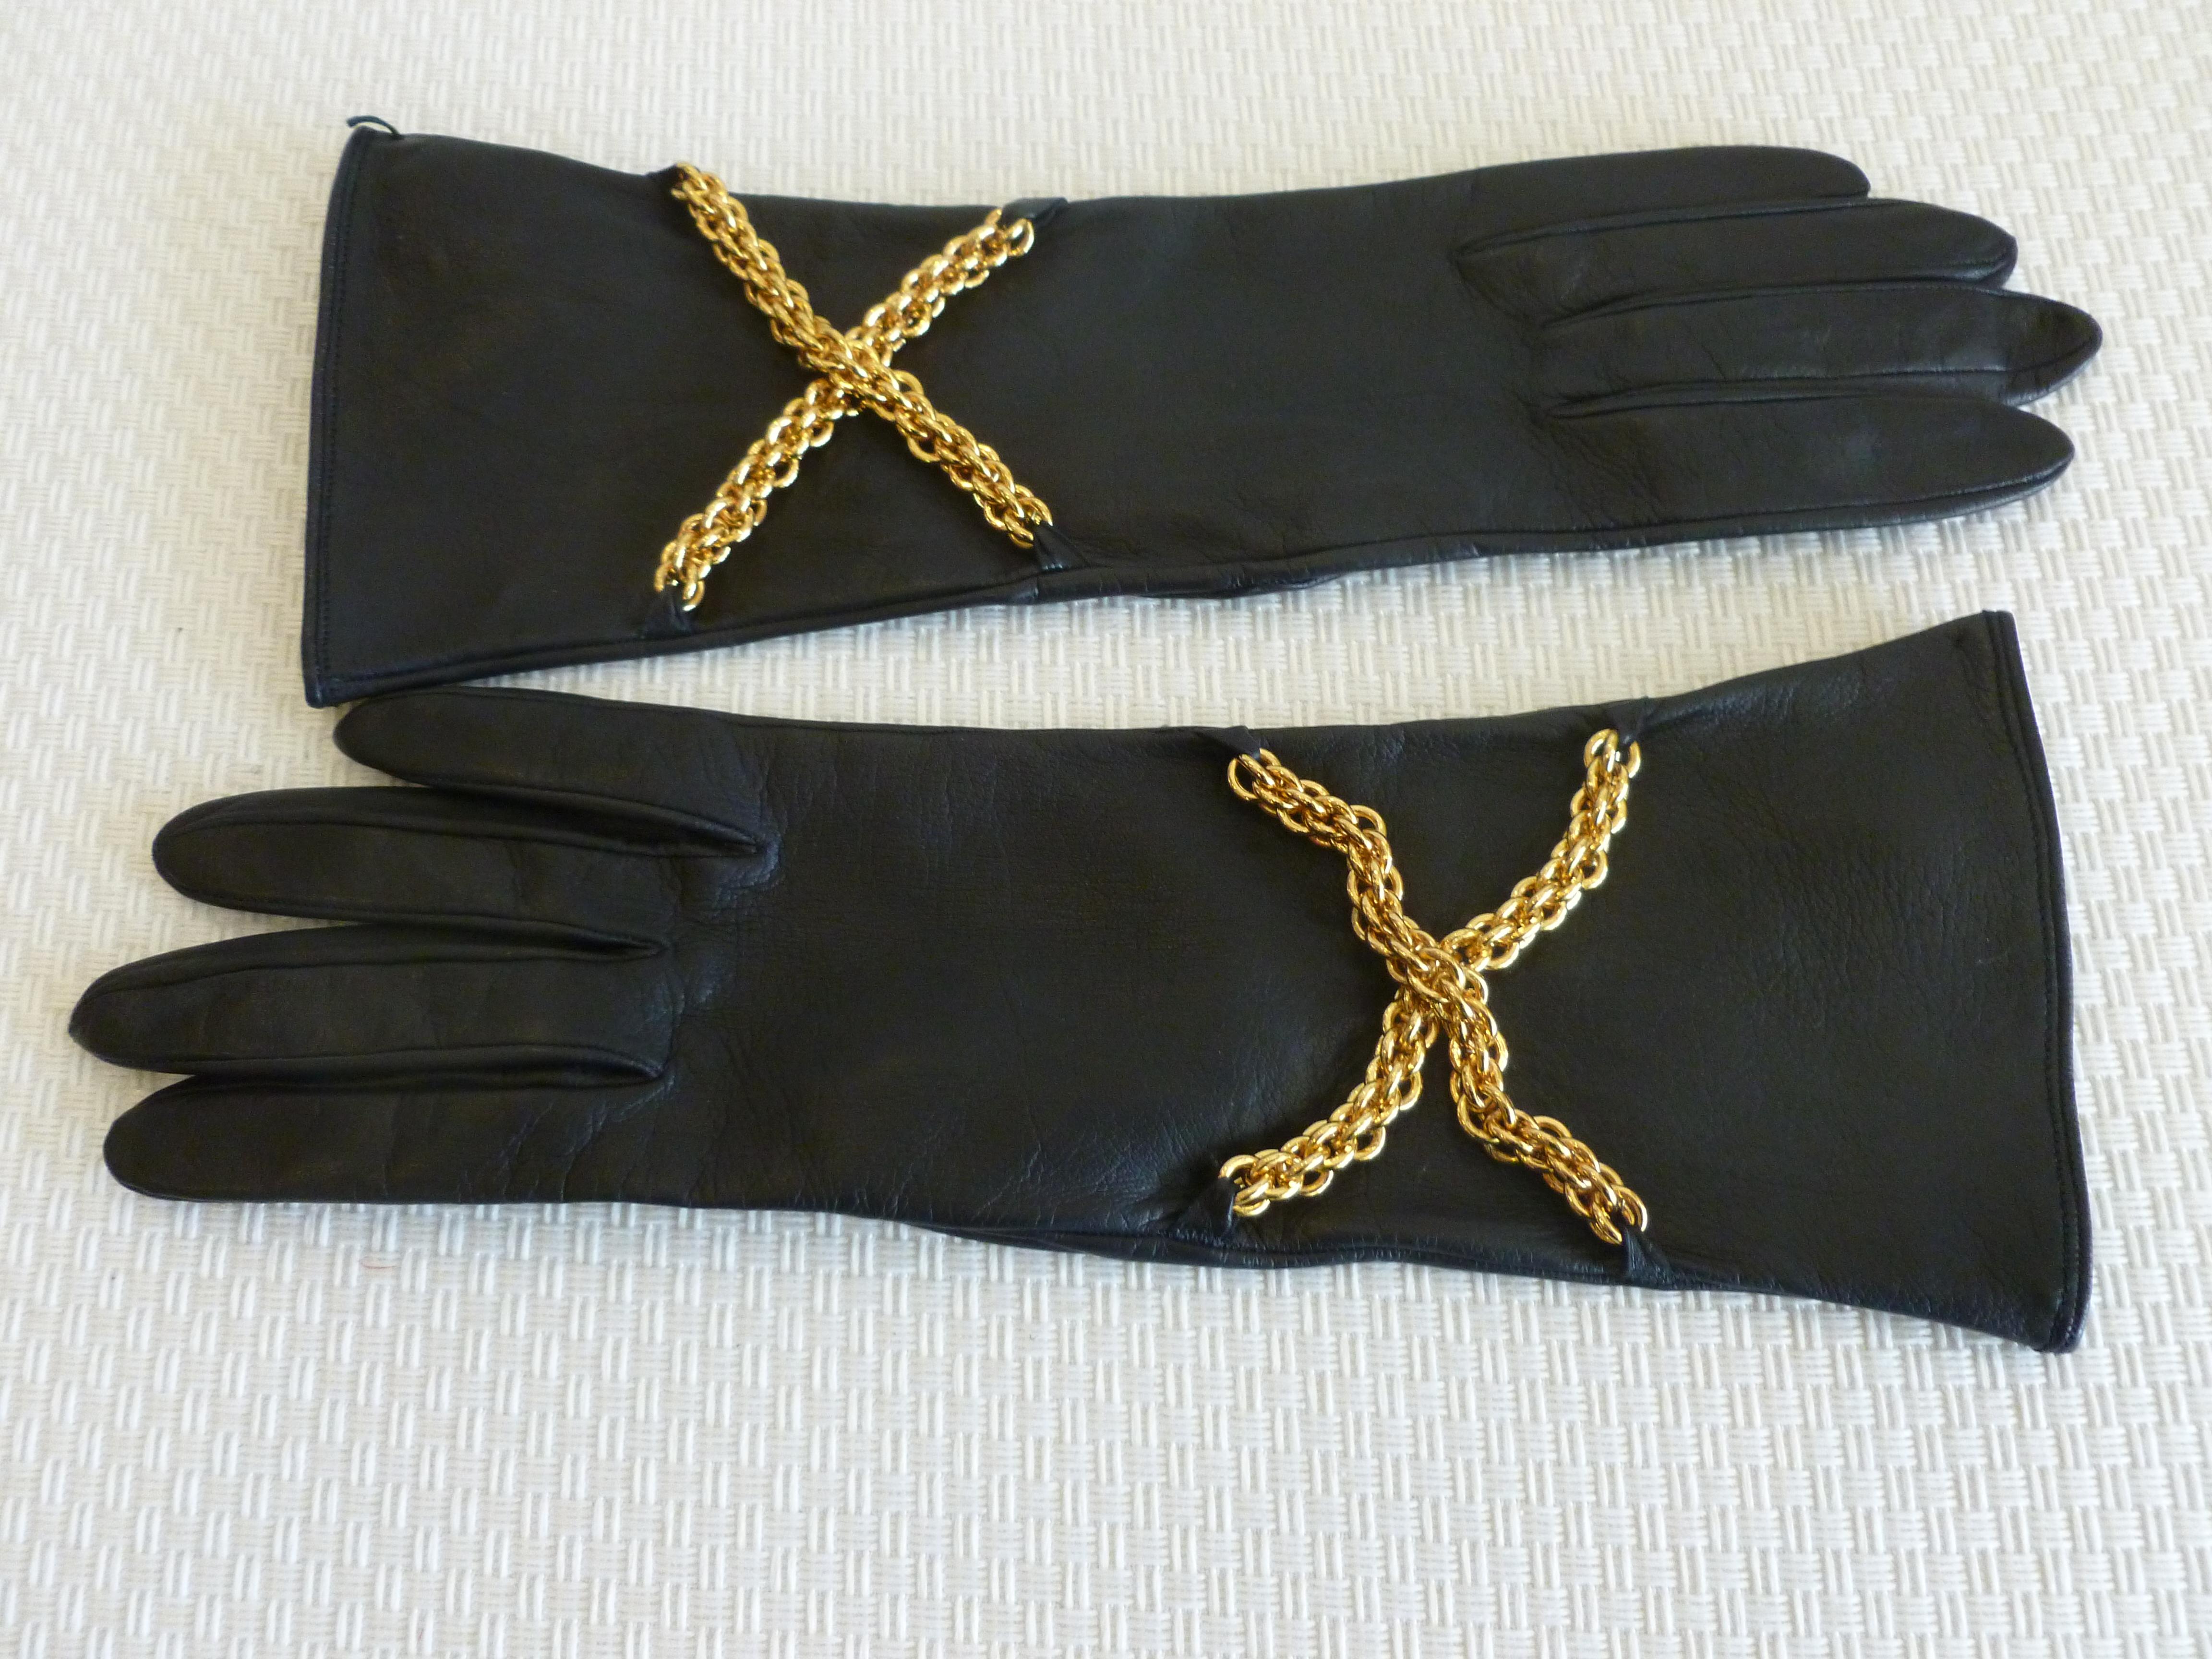  Paloma Picasso Back Leather and Brass Chain Gloves Pair Of 6